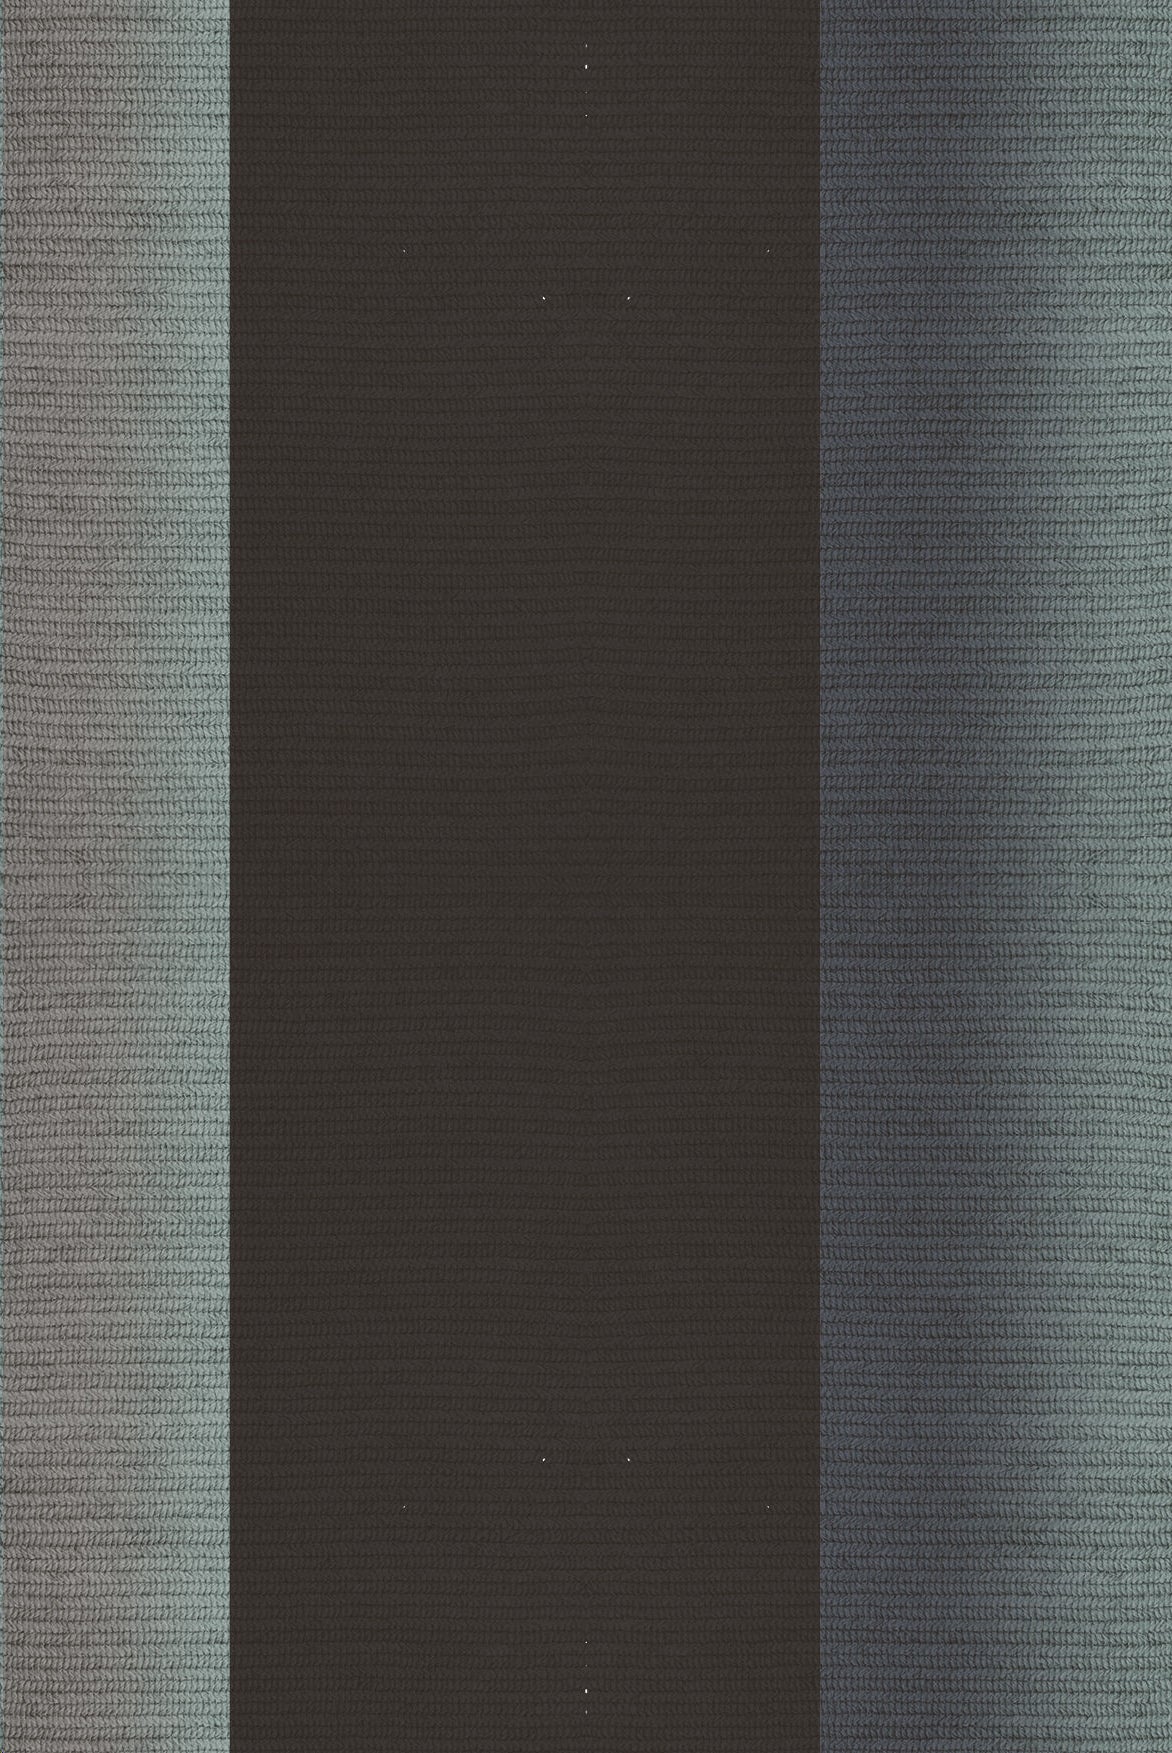 Claire Vos for Musett 'Blur' Abaca Indoor Rug in Color Sterling, 160 x 240 cm